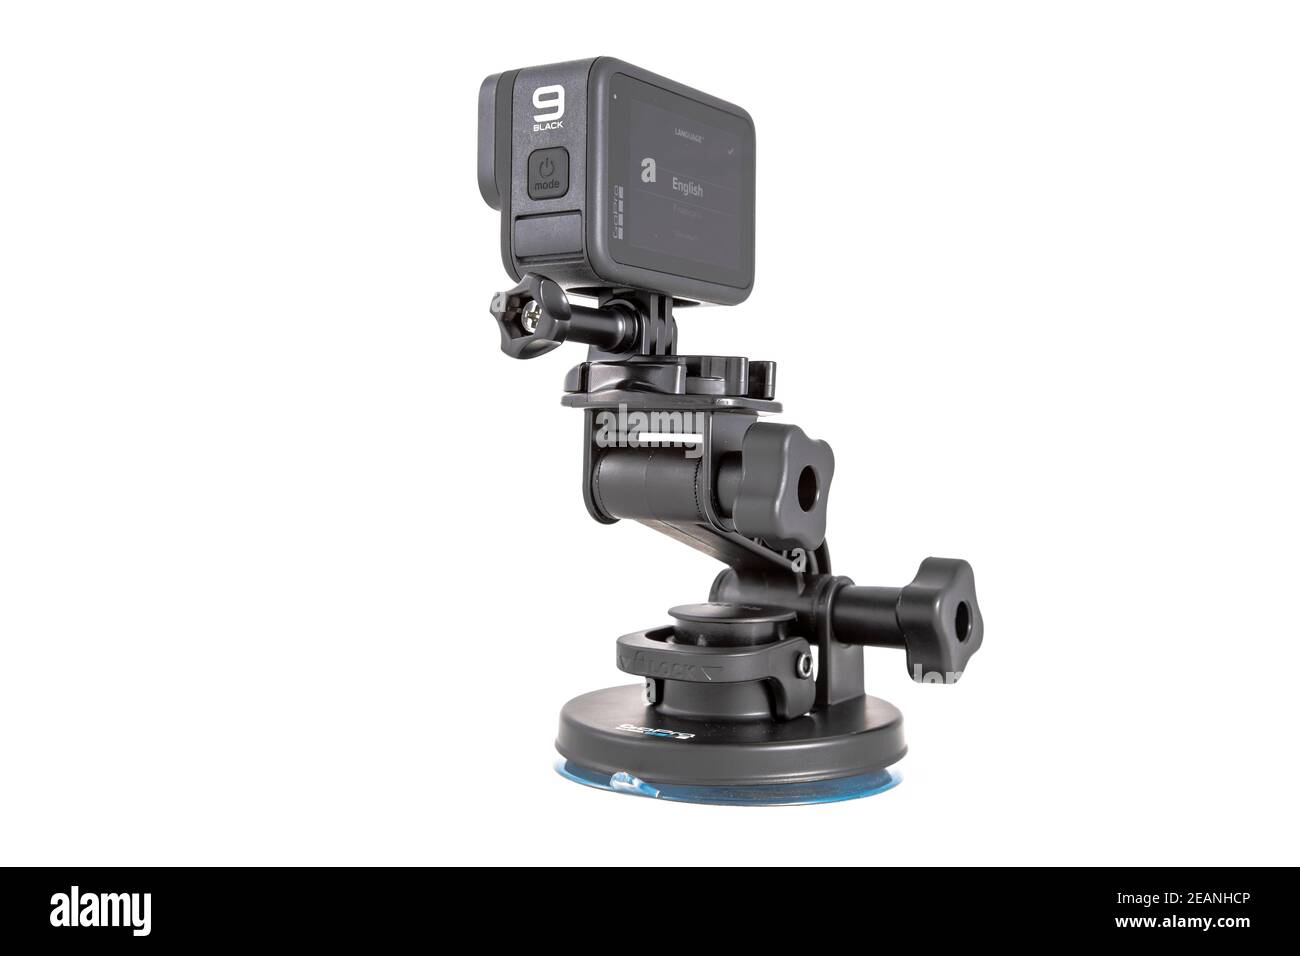 moscow, russia - Novemner 11, 2020: new flagship action camera gopro hero 9 black on original accessory mount tripod. isolated on white background.. Stock Photo